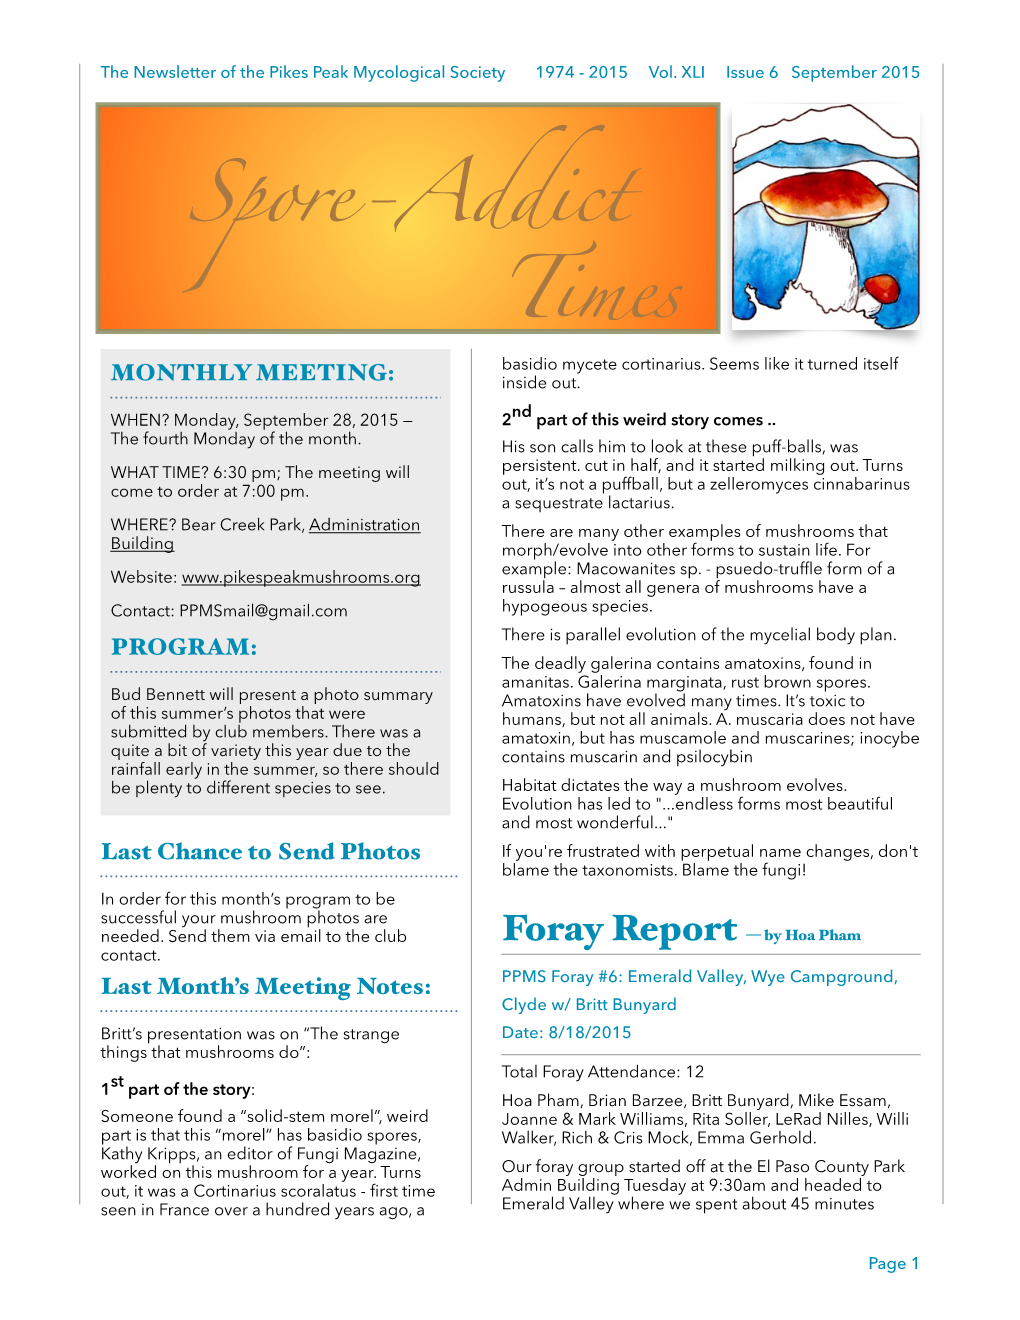 Spore-Addict Times Monthly from April-September